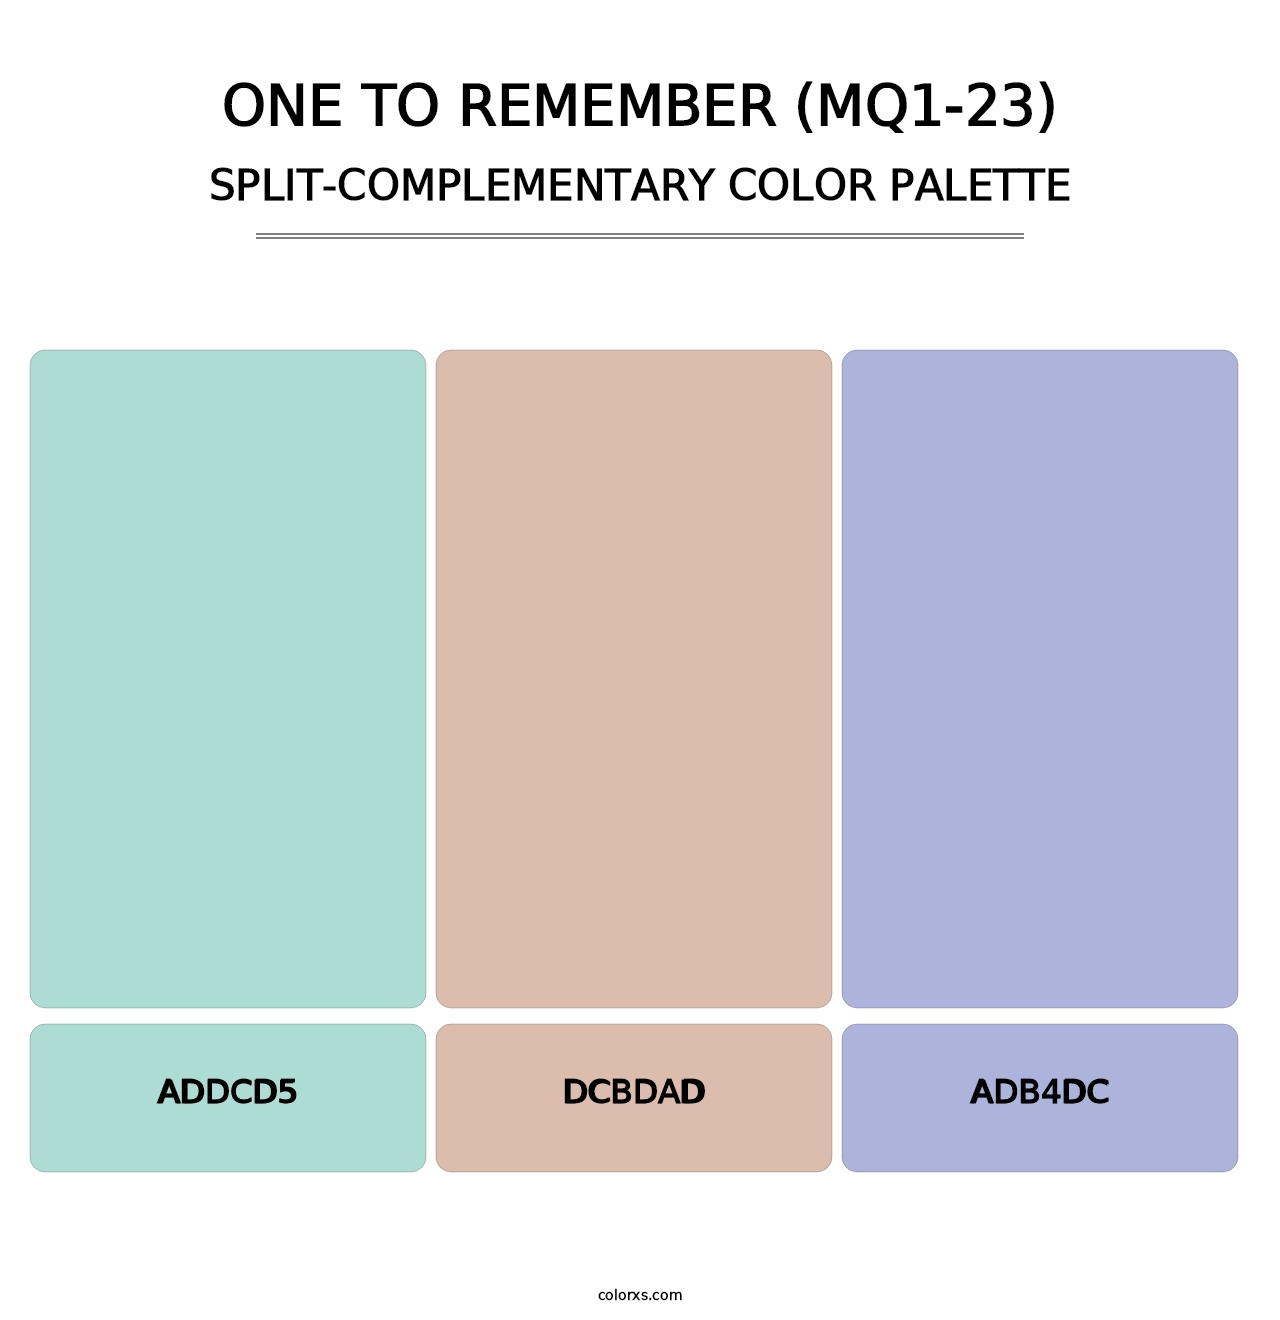 One To Remember (MQ1-23) - Split-Complementary Color Palette